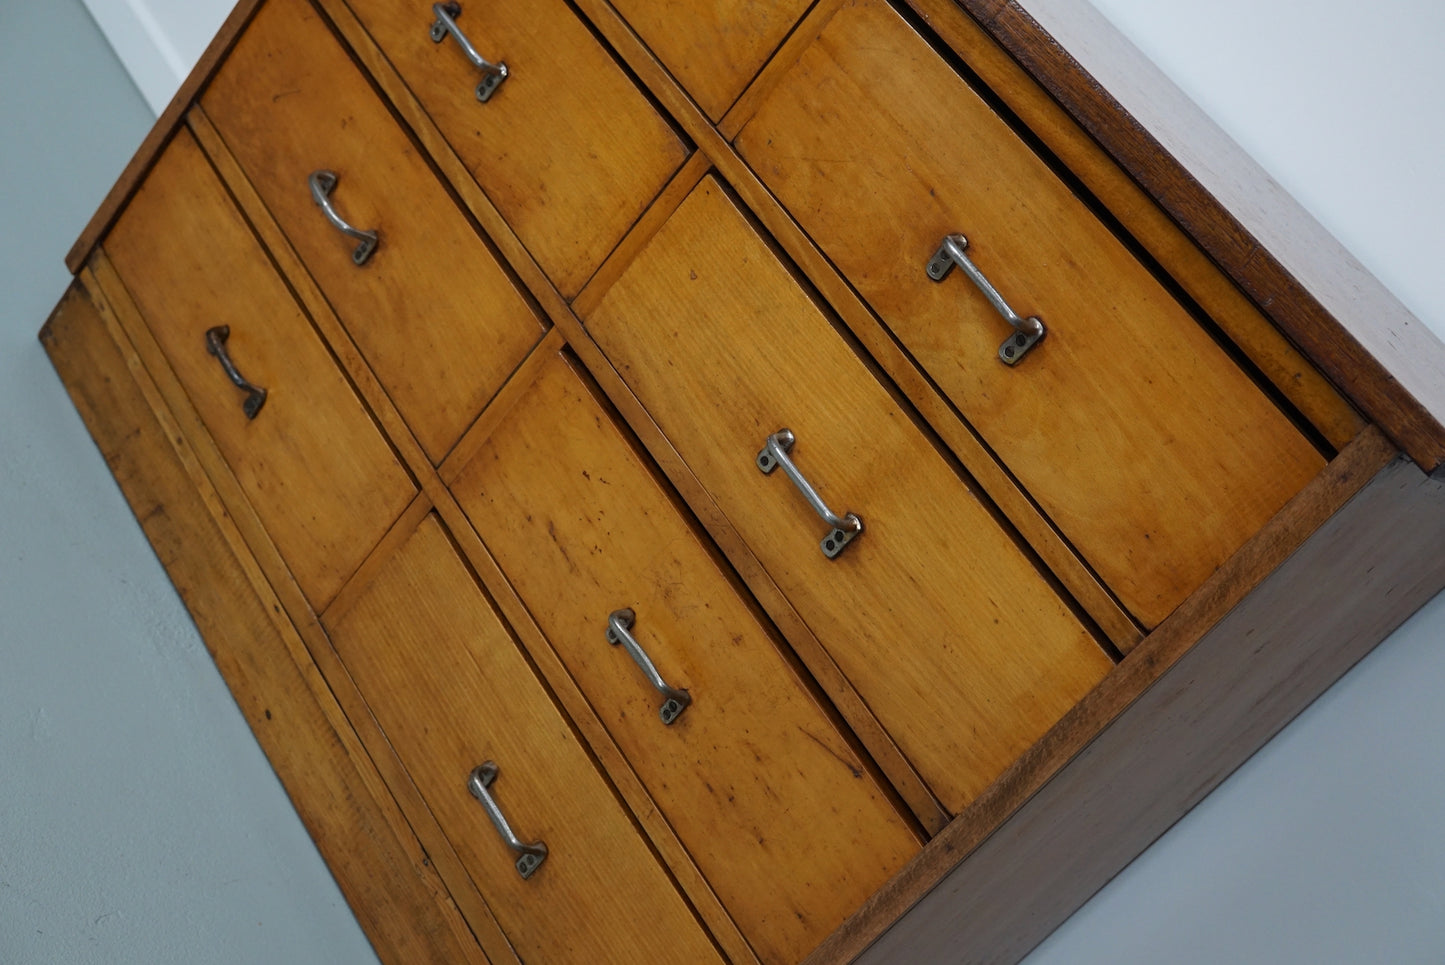 Dutch Industrial Beech Apothecary Cabinet, Mid-20th Century